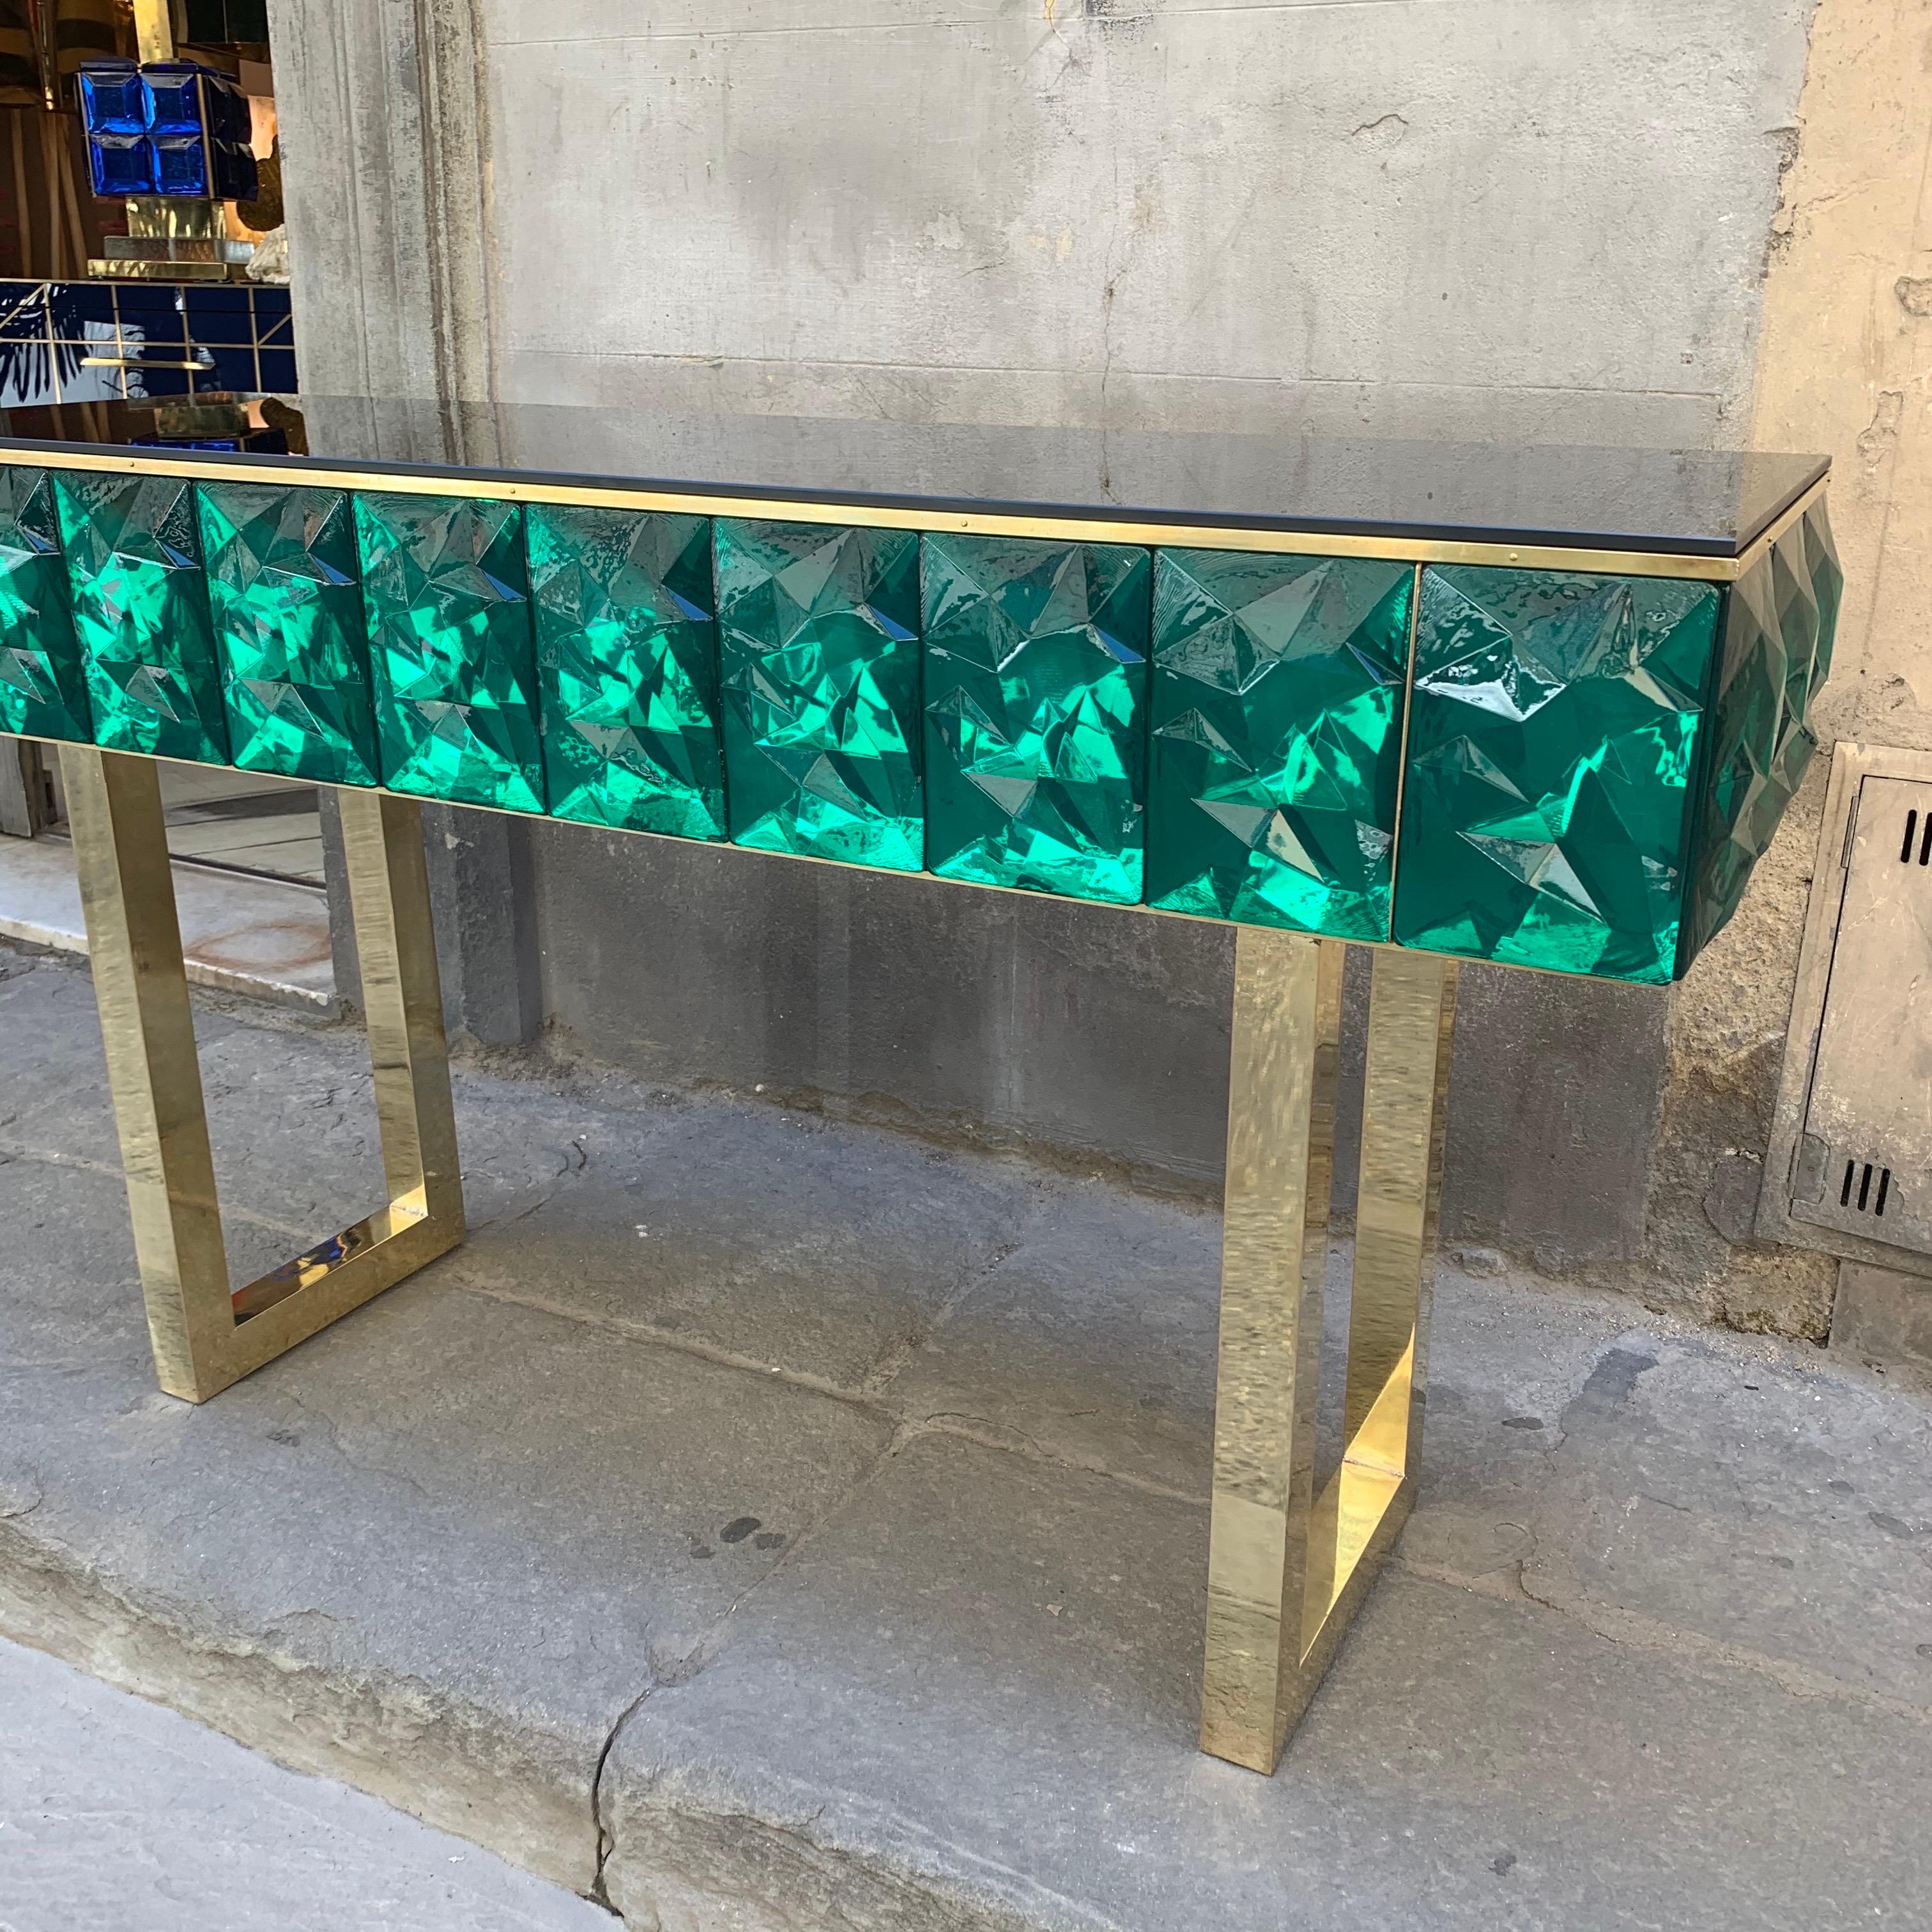 Emerald Murano Glass Console with Blue Black Opaline Glass Top, Brass Legs, 2020 For Sale 2